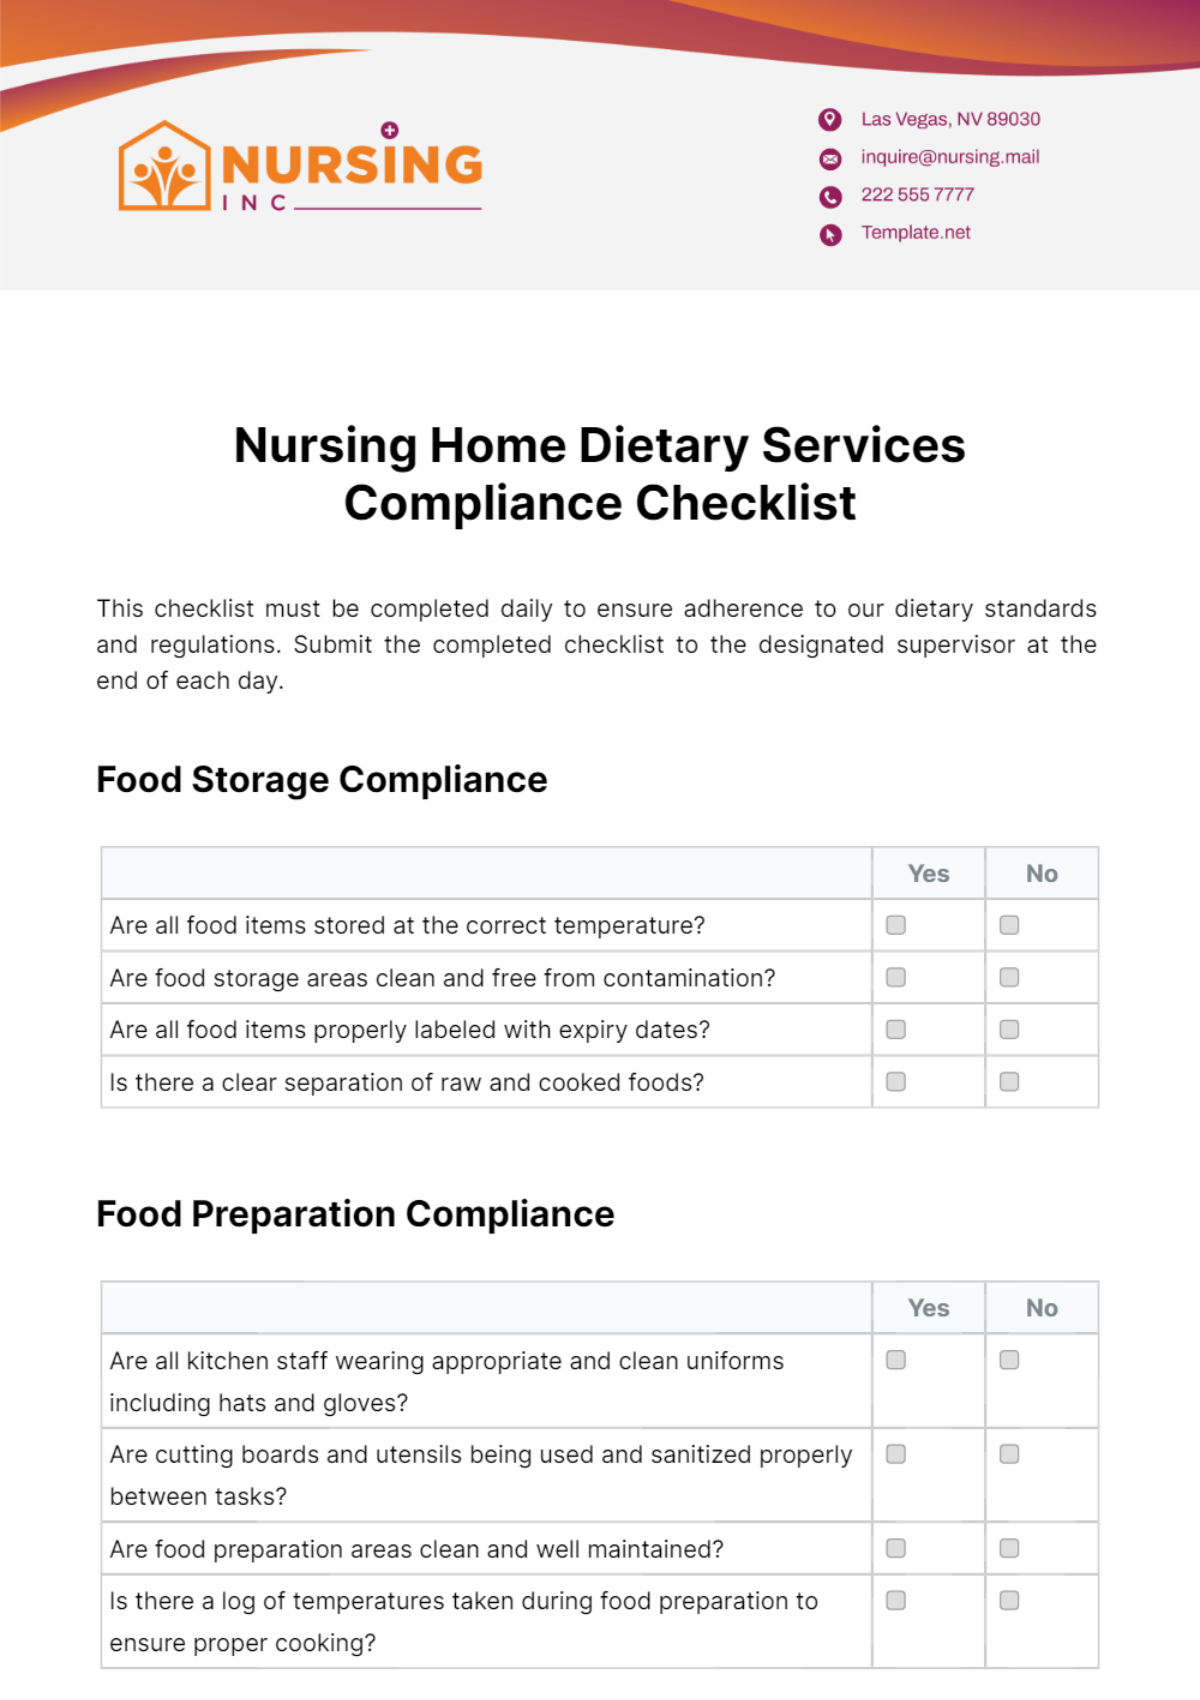 Free Nursing Home Dietary Services Compliance Checklist Template